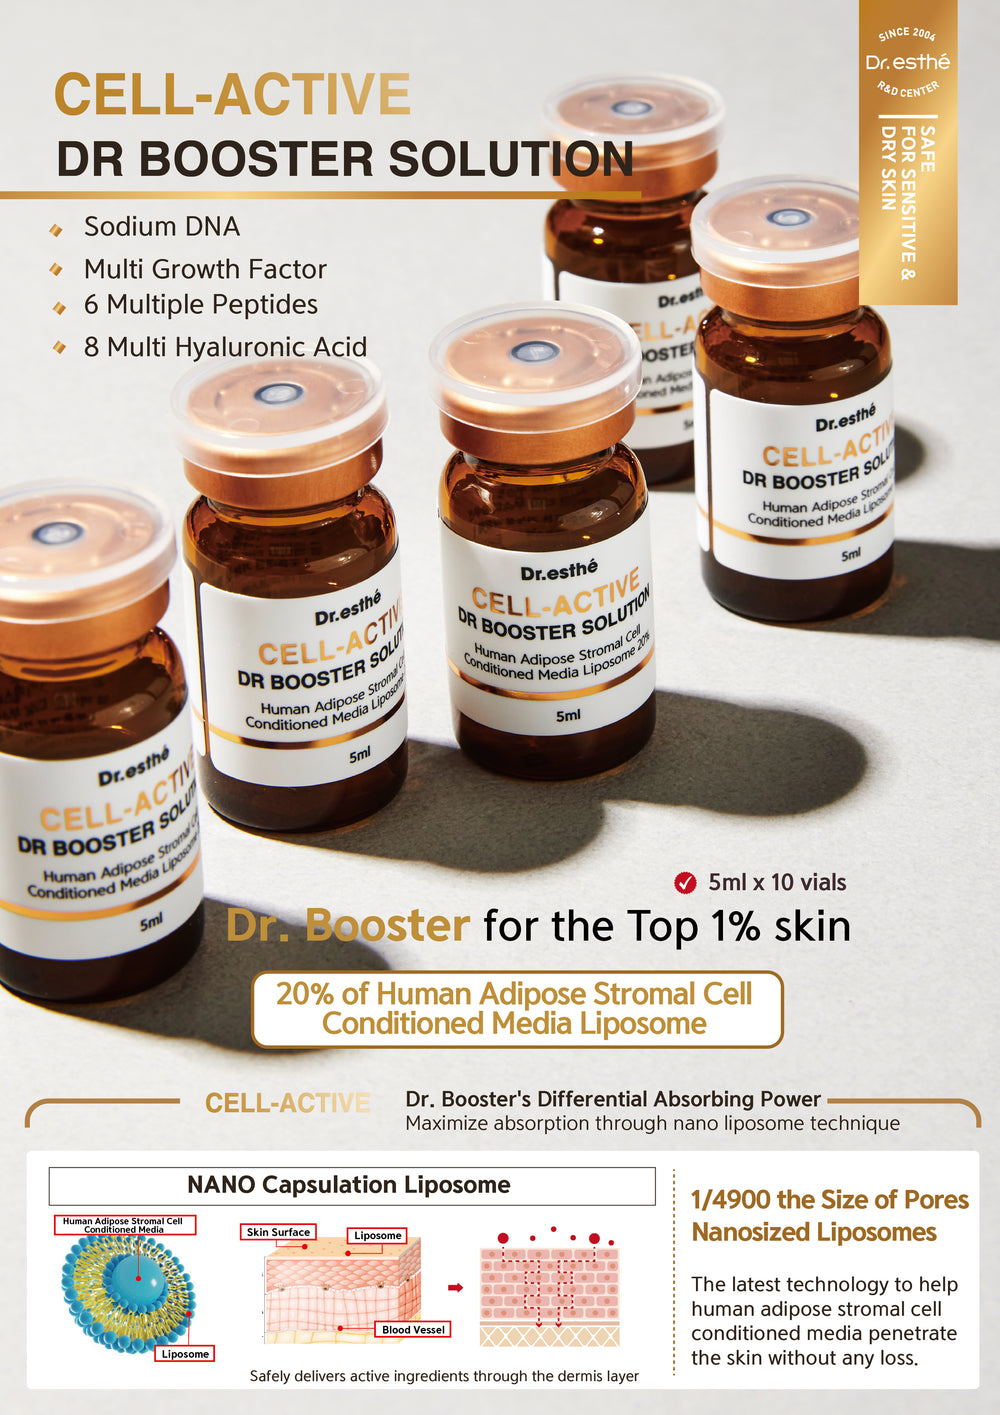 CELL-ACTIVE DR BOOSTER SOLUTION